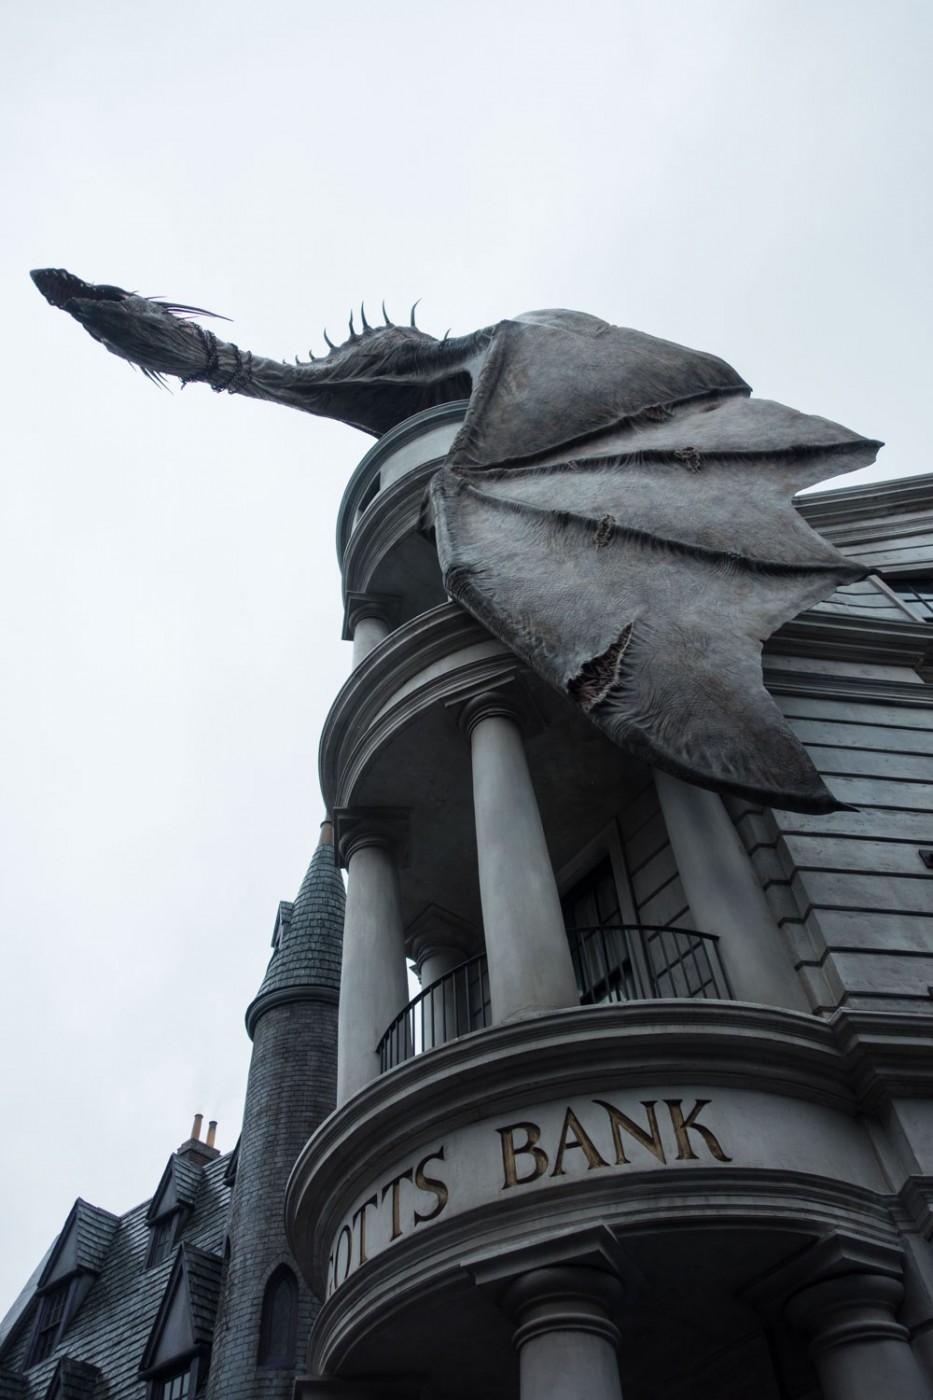 Harry Potter and the Escape from Gringotts ride at Universal Studios Florida